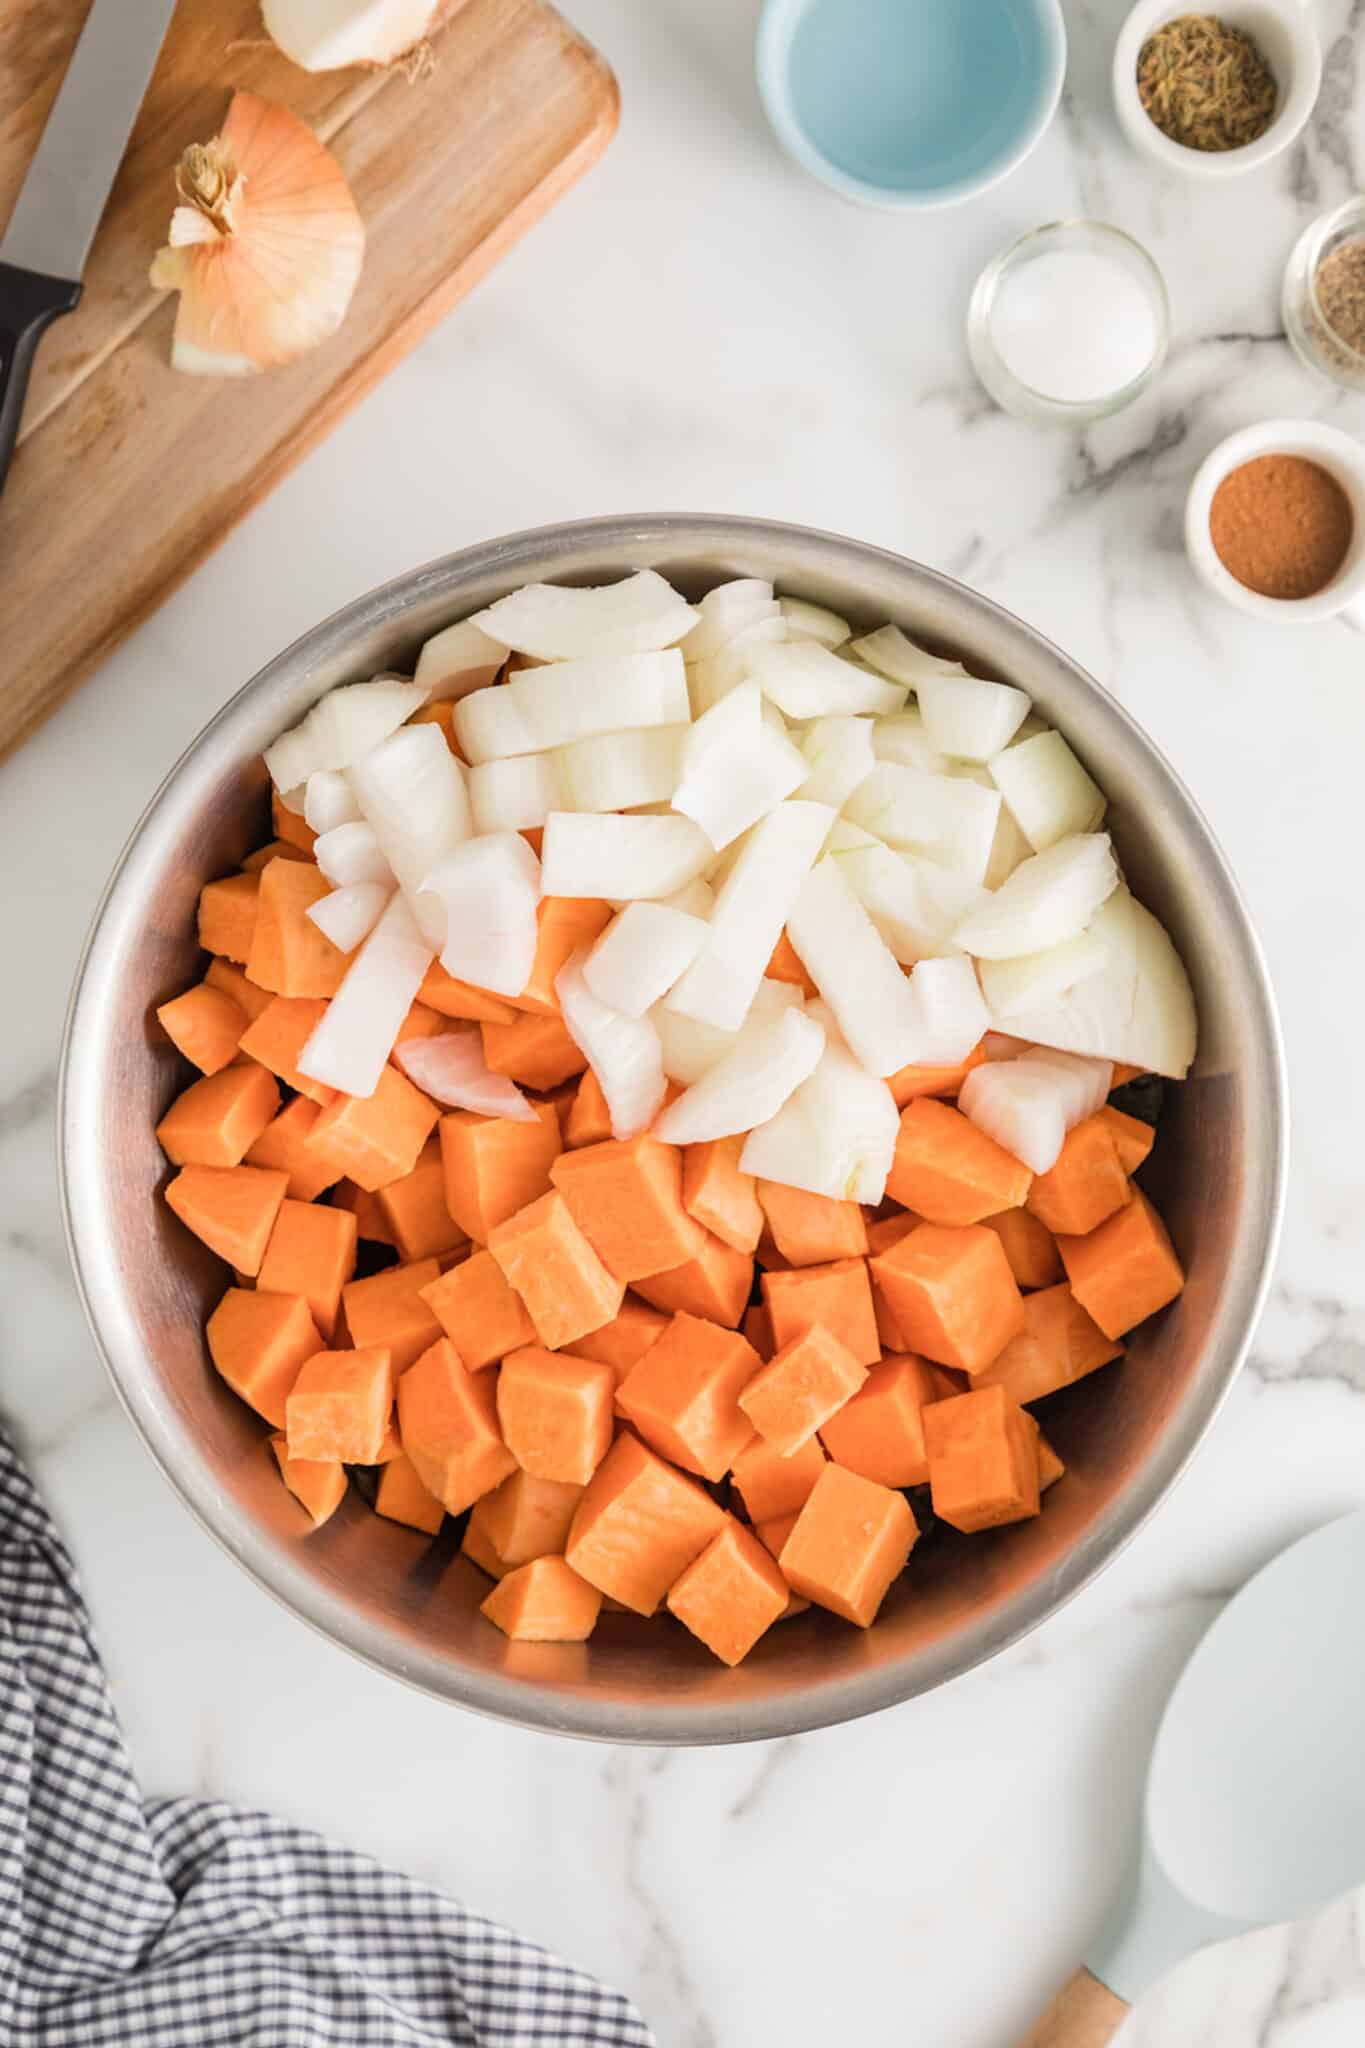 Diced sweet potatoes and white onion in a stainless bowl.